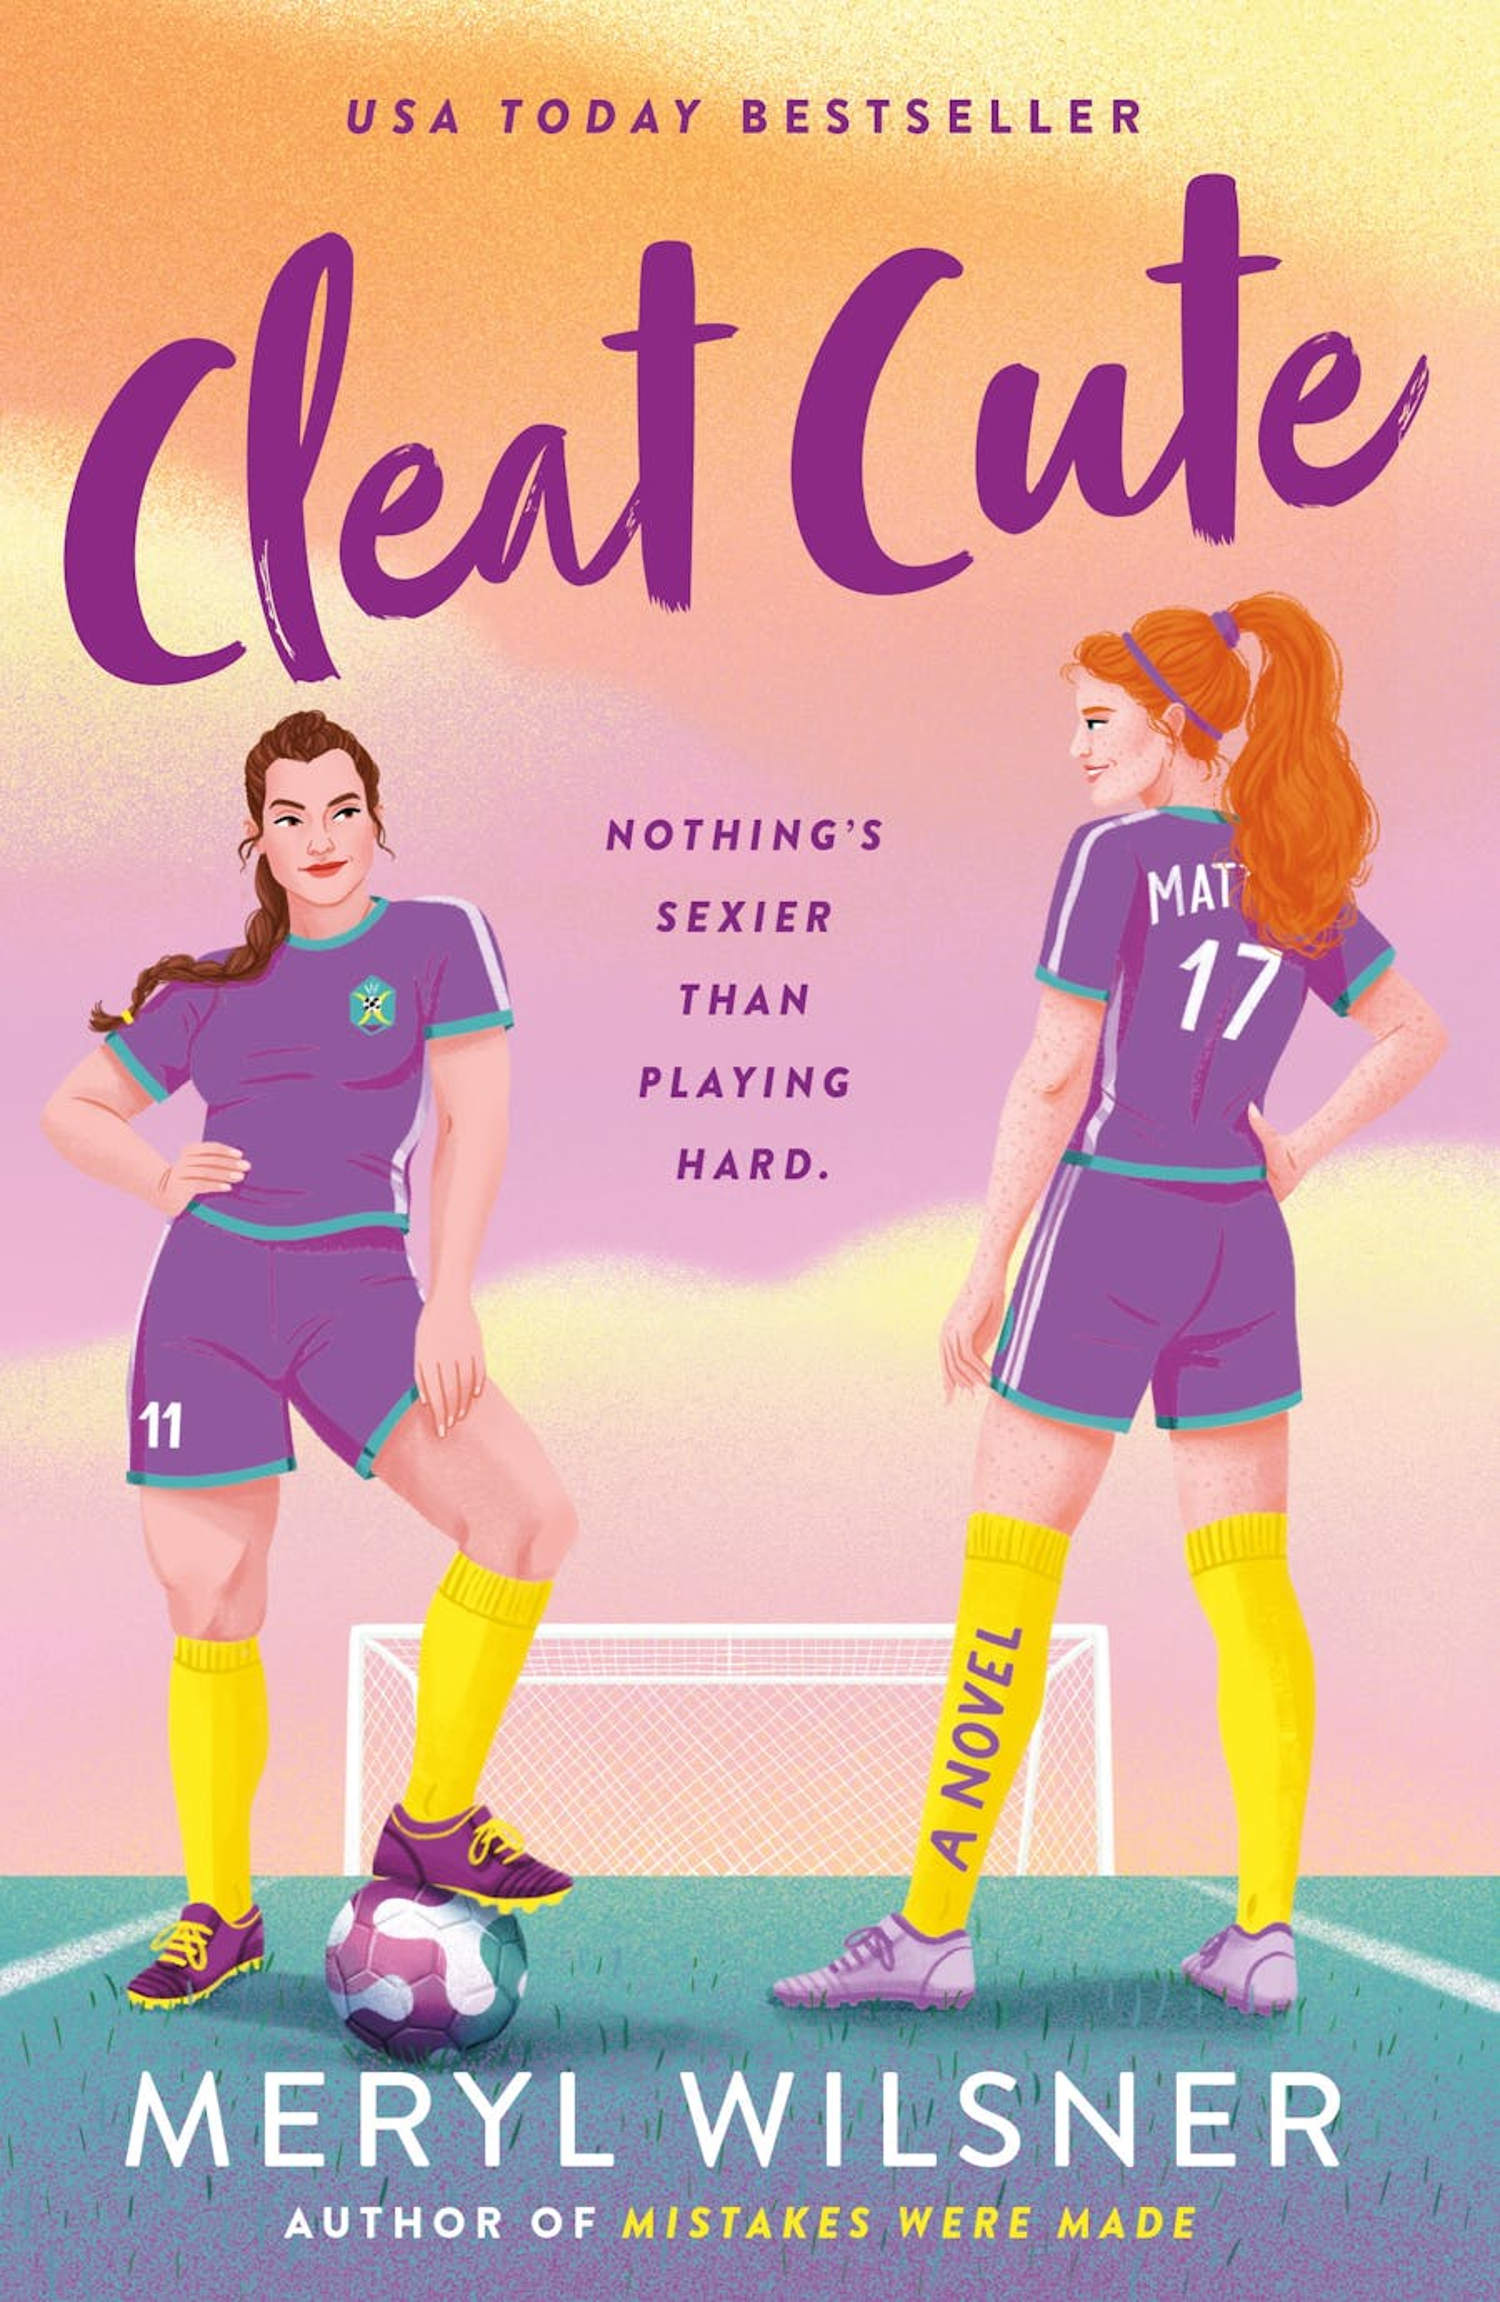 Sue Bird and Megan Rapinoe to produce queer soccer romance 'Cleat Cute'